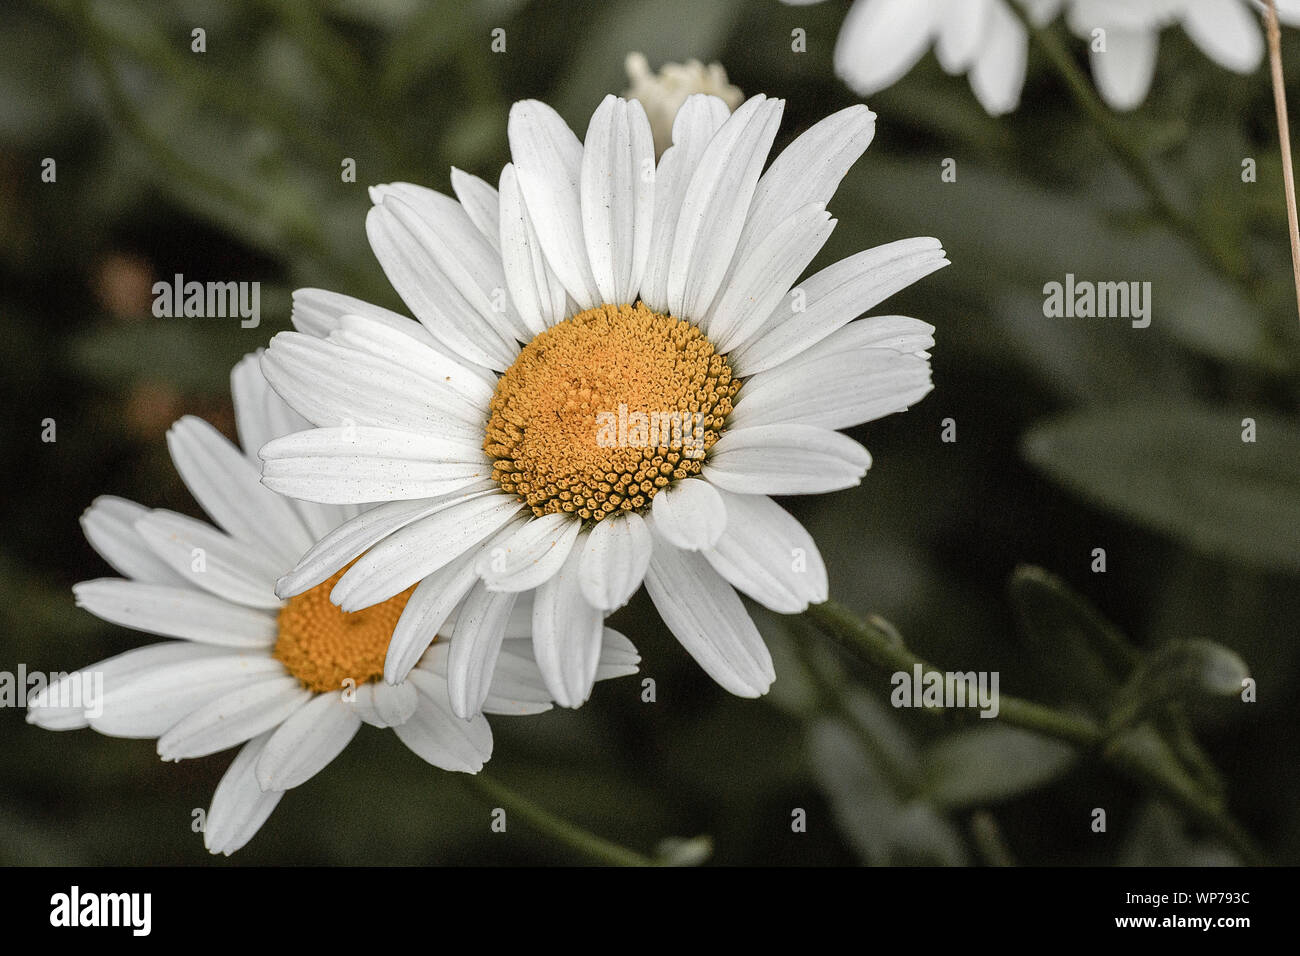 Closeup macro photography of 2 blossoms of the daisy flower. Stock Photo